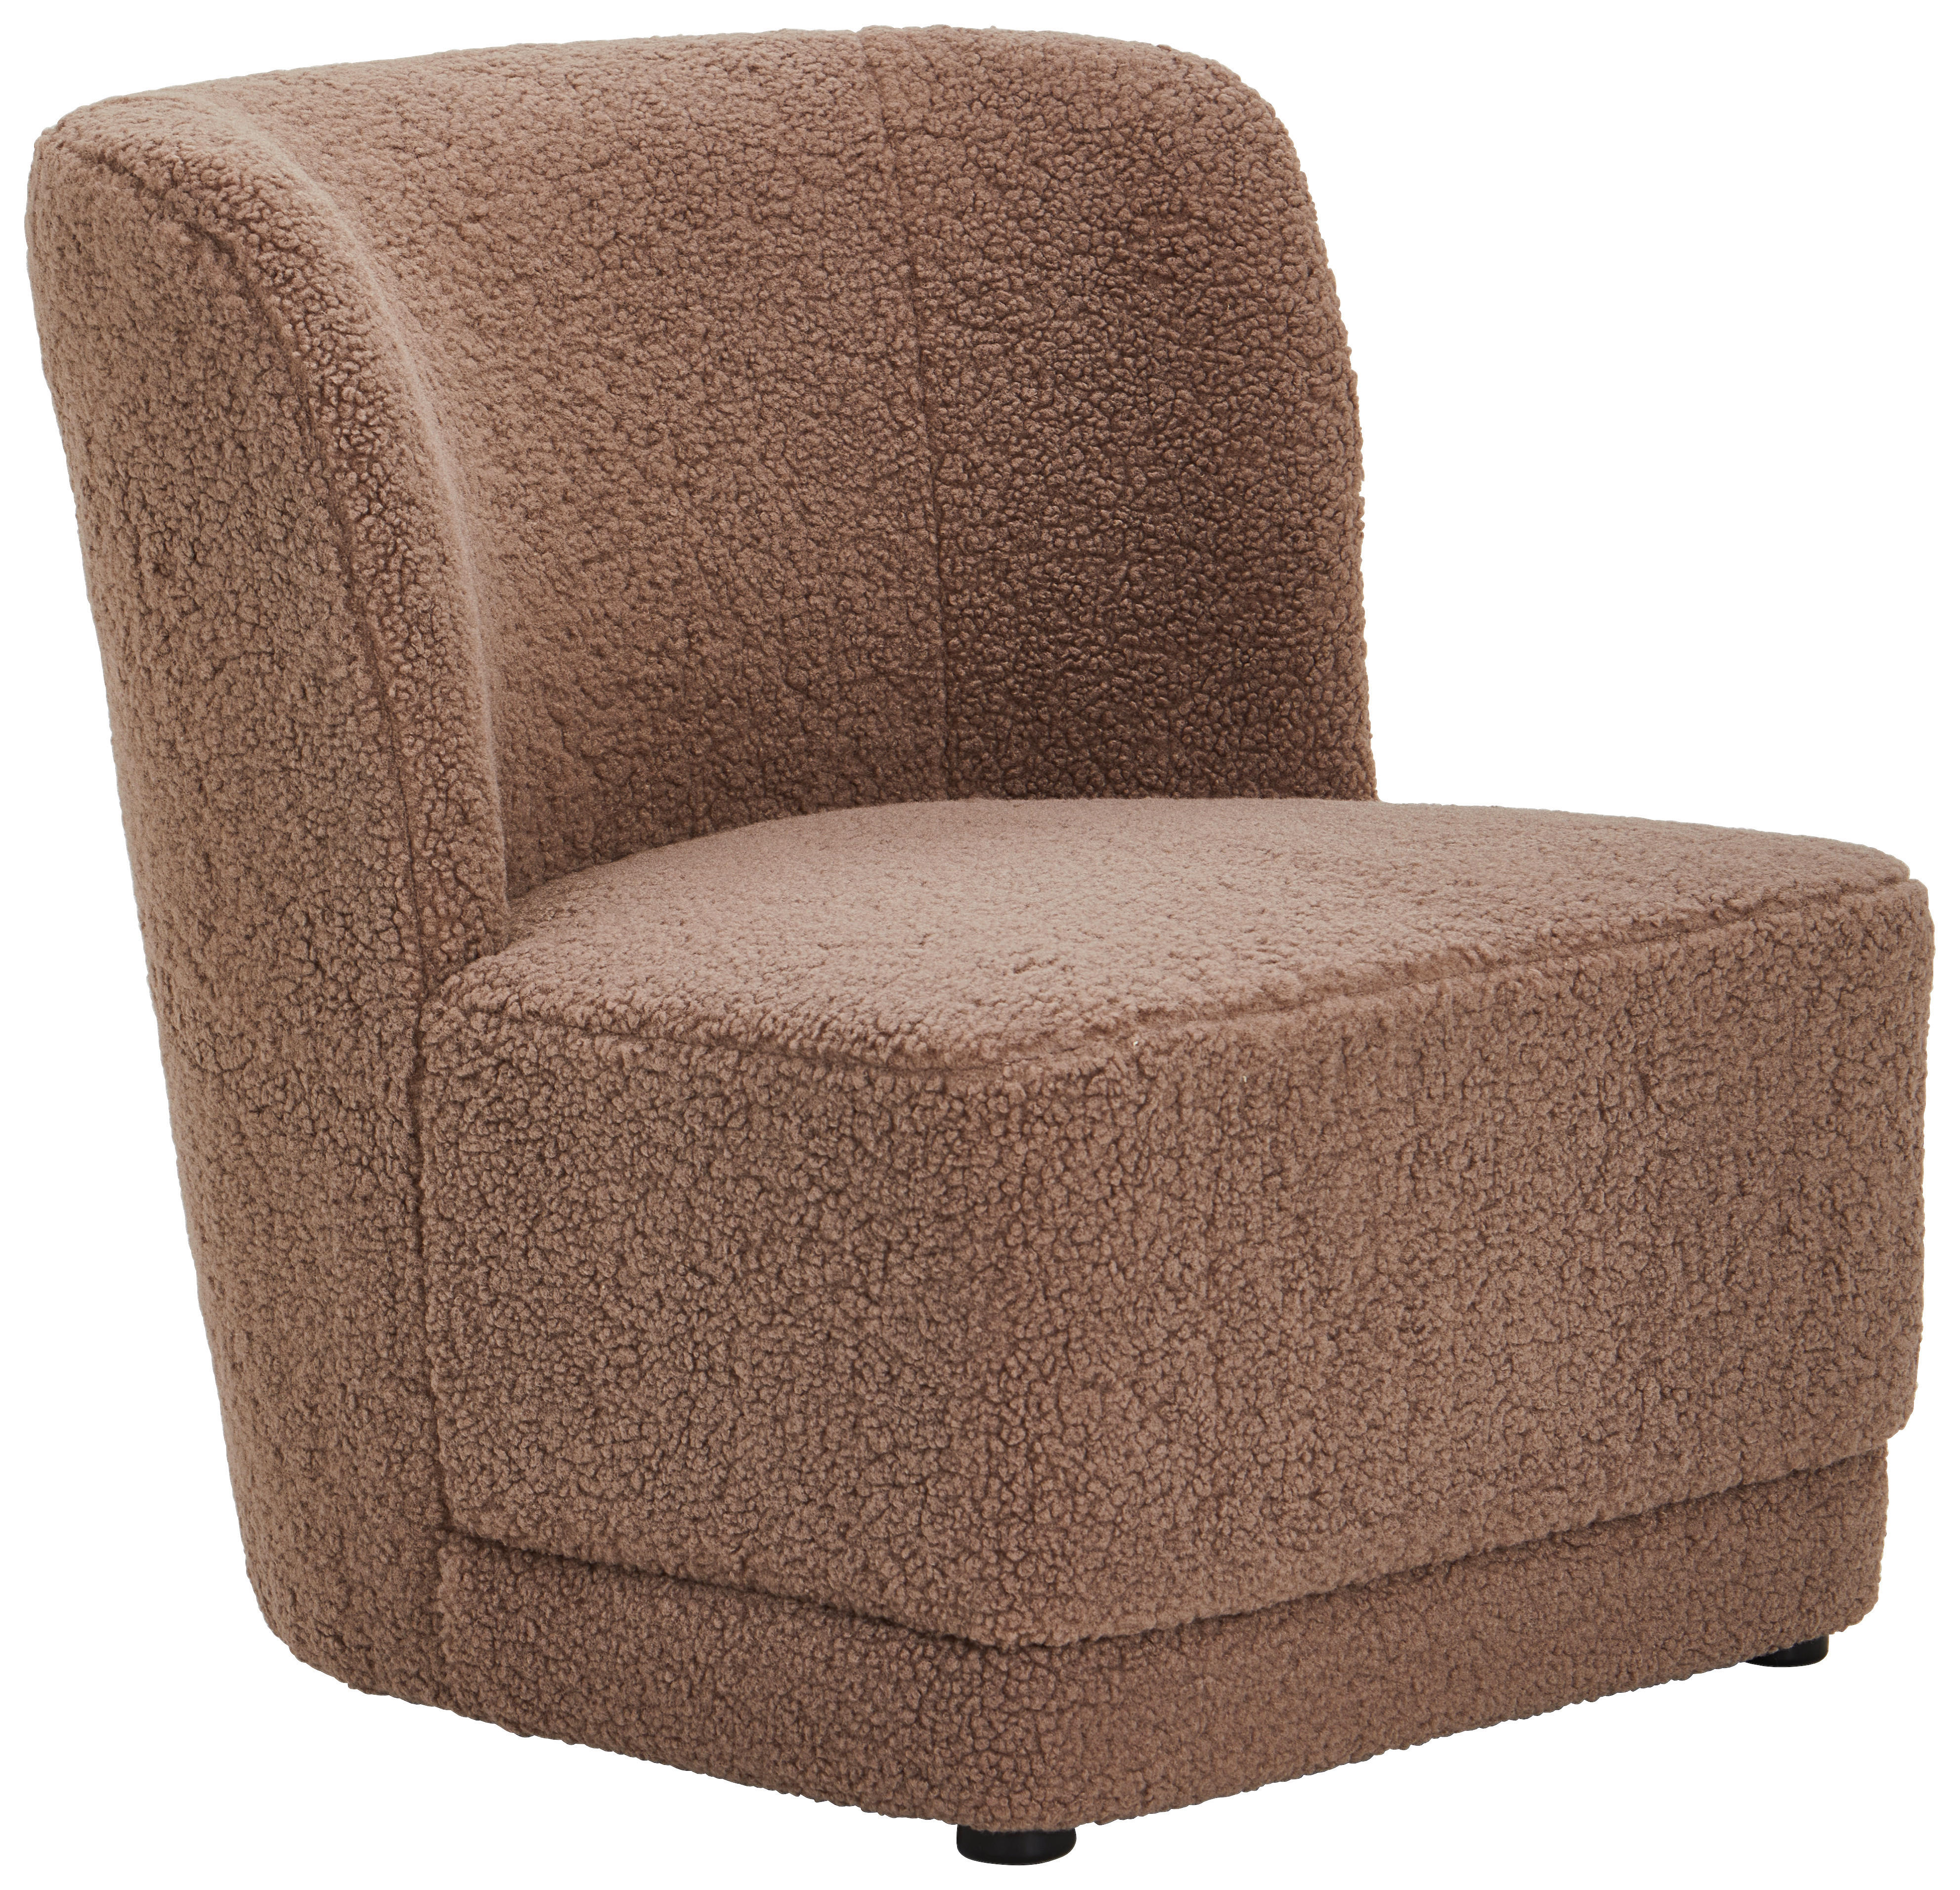 SESSEL in Bouclé, Teddystoff Taupe  - Taupe, Design, Holz/Textil (64/71cm) - MID.YOU